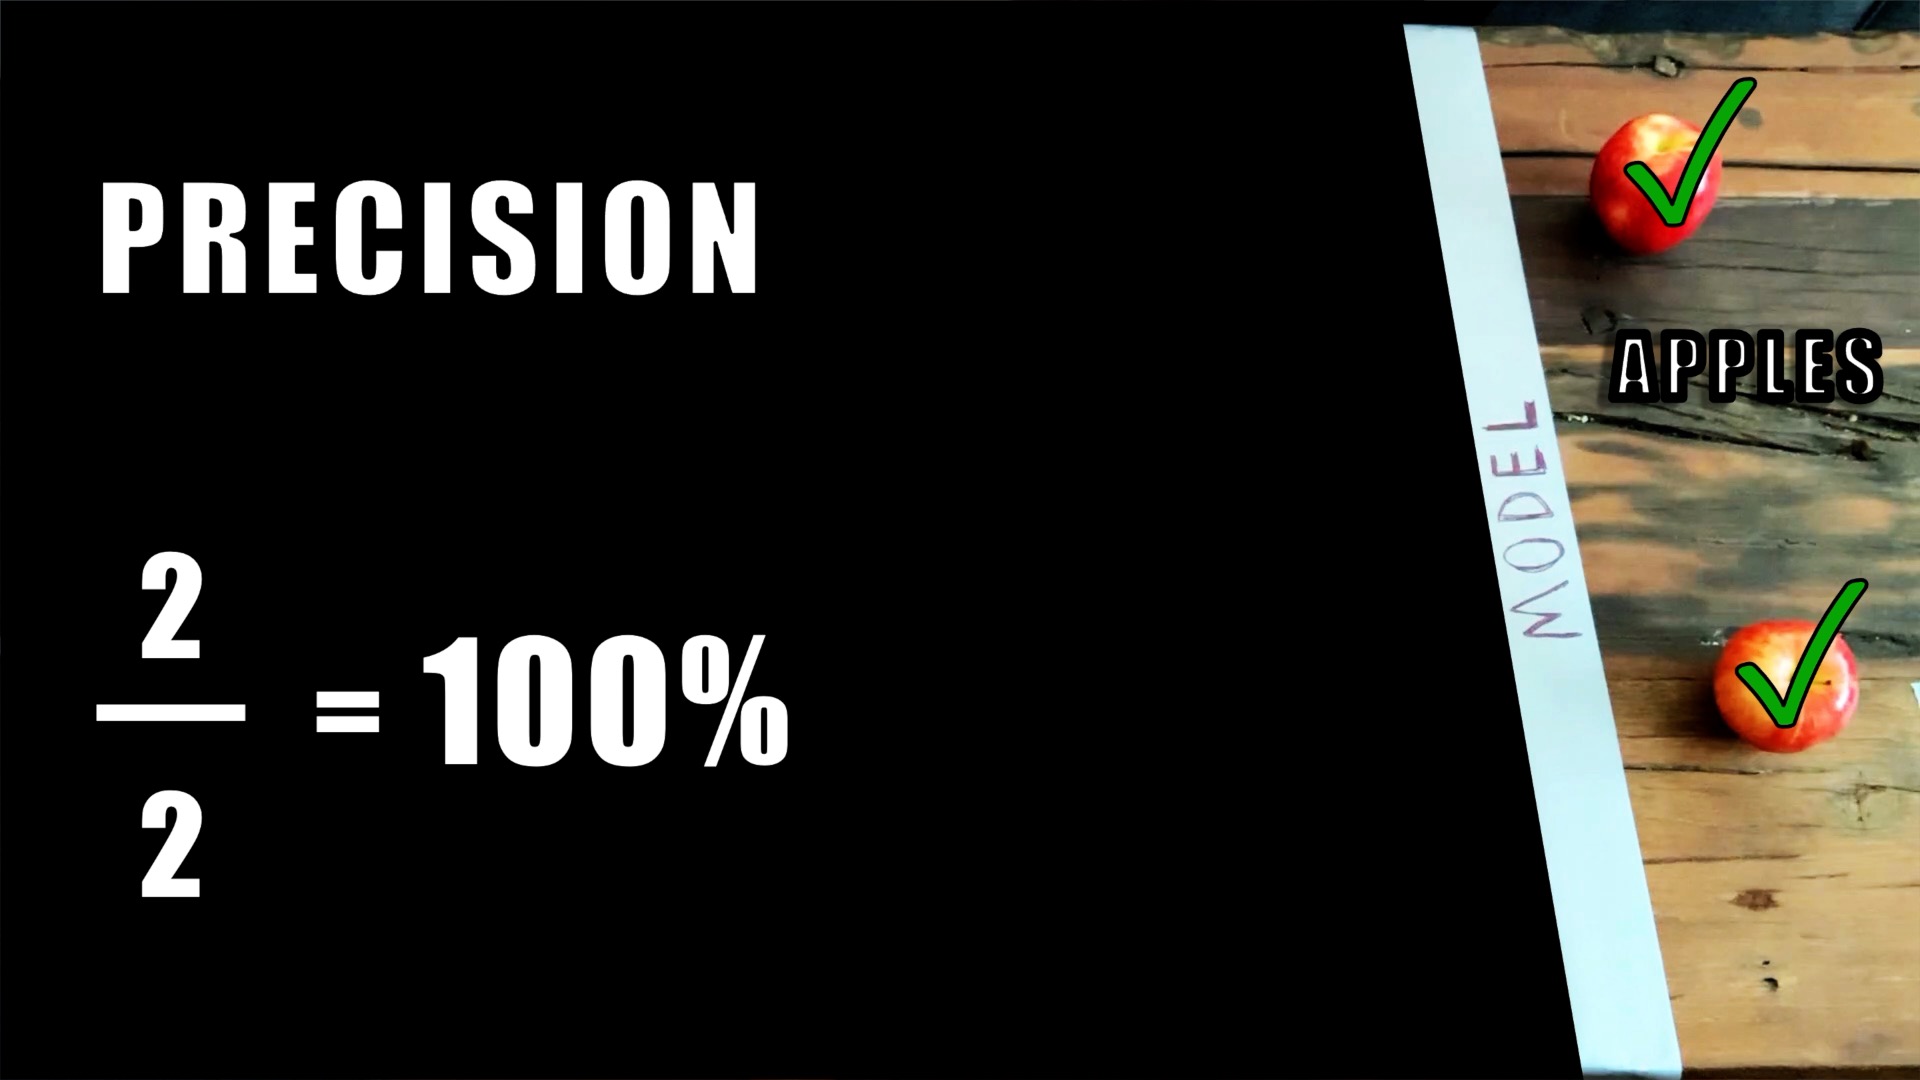 With the decision threshold increased, precision increased to 100% for the apple class